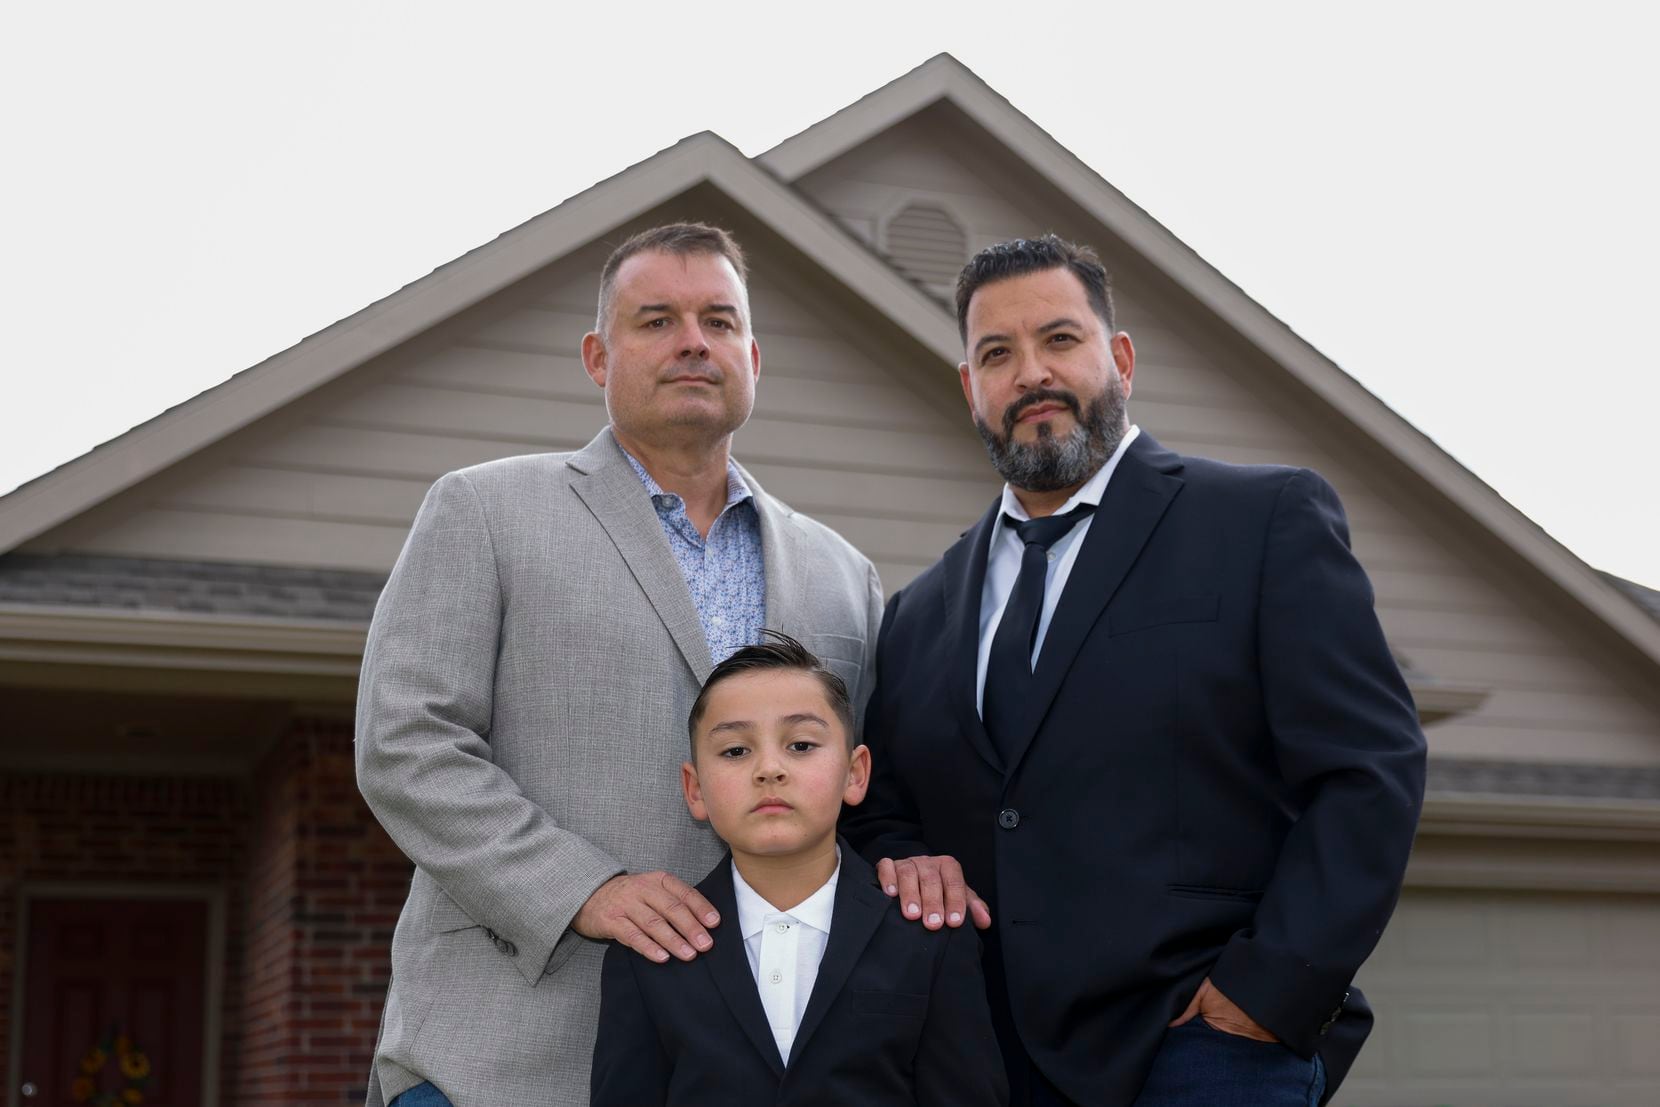 Gay dads face hate in a small Texas town, but then help uncover